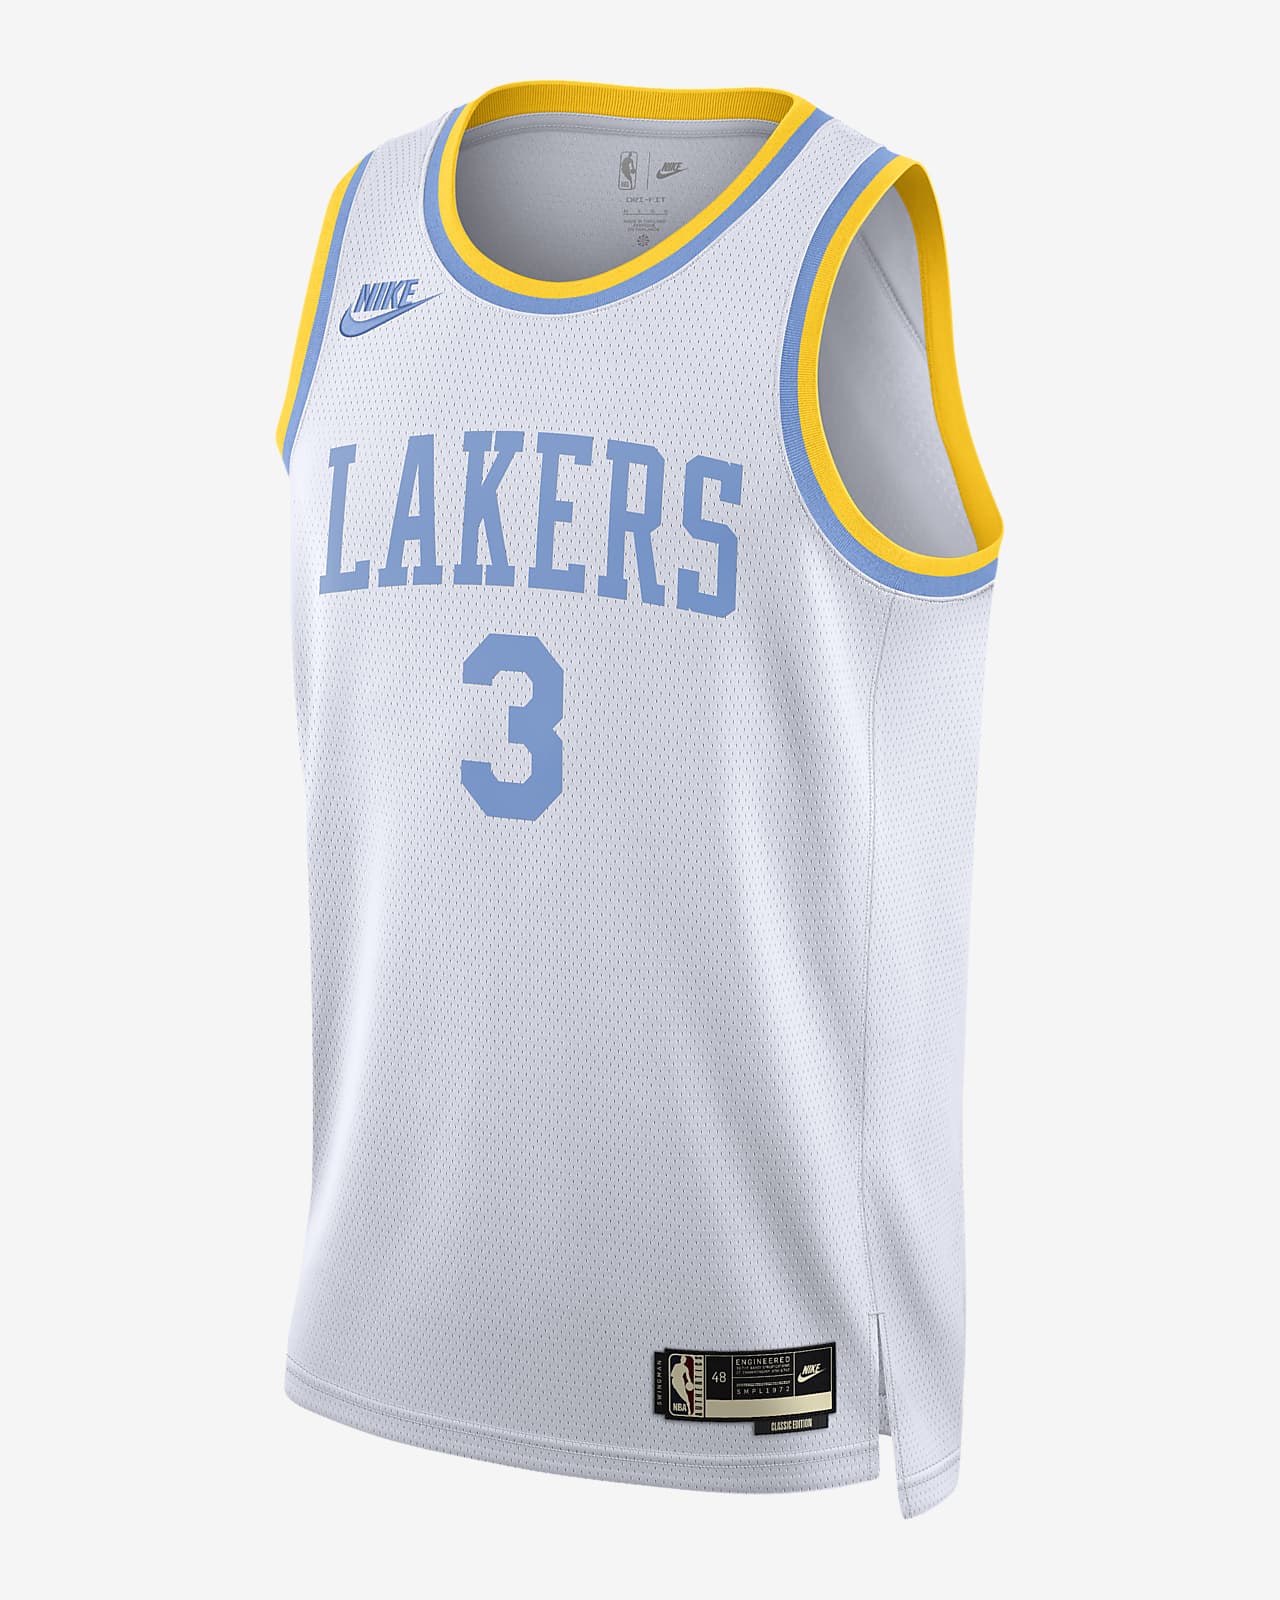 lakers first jersey